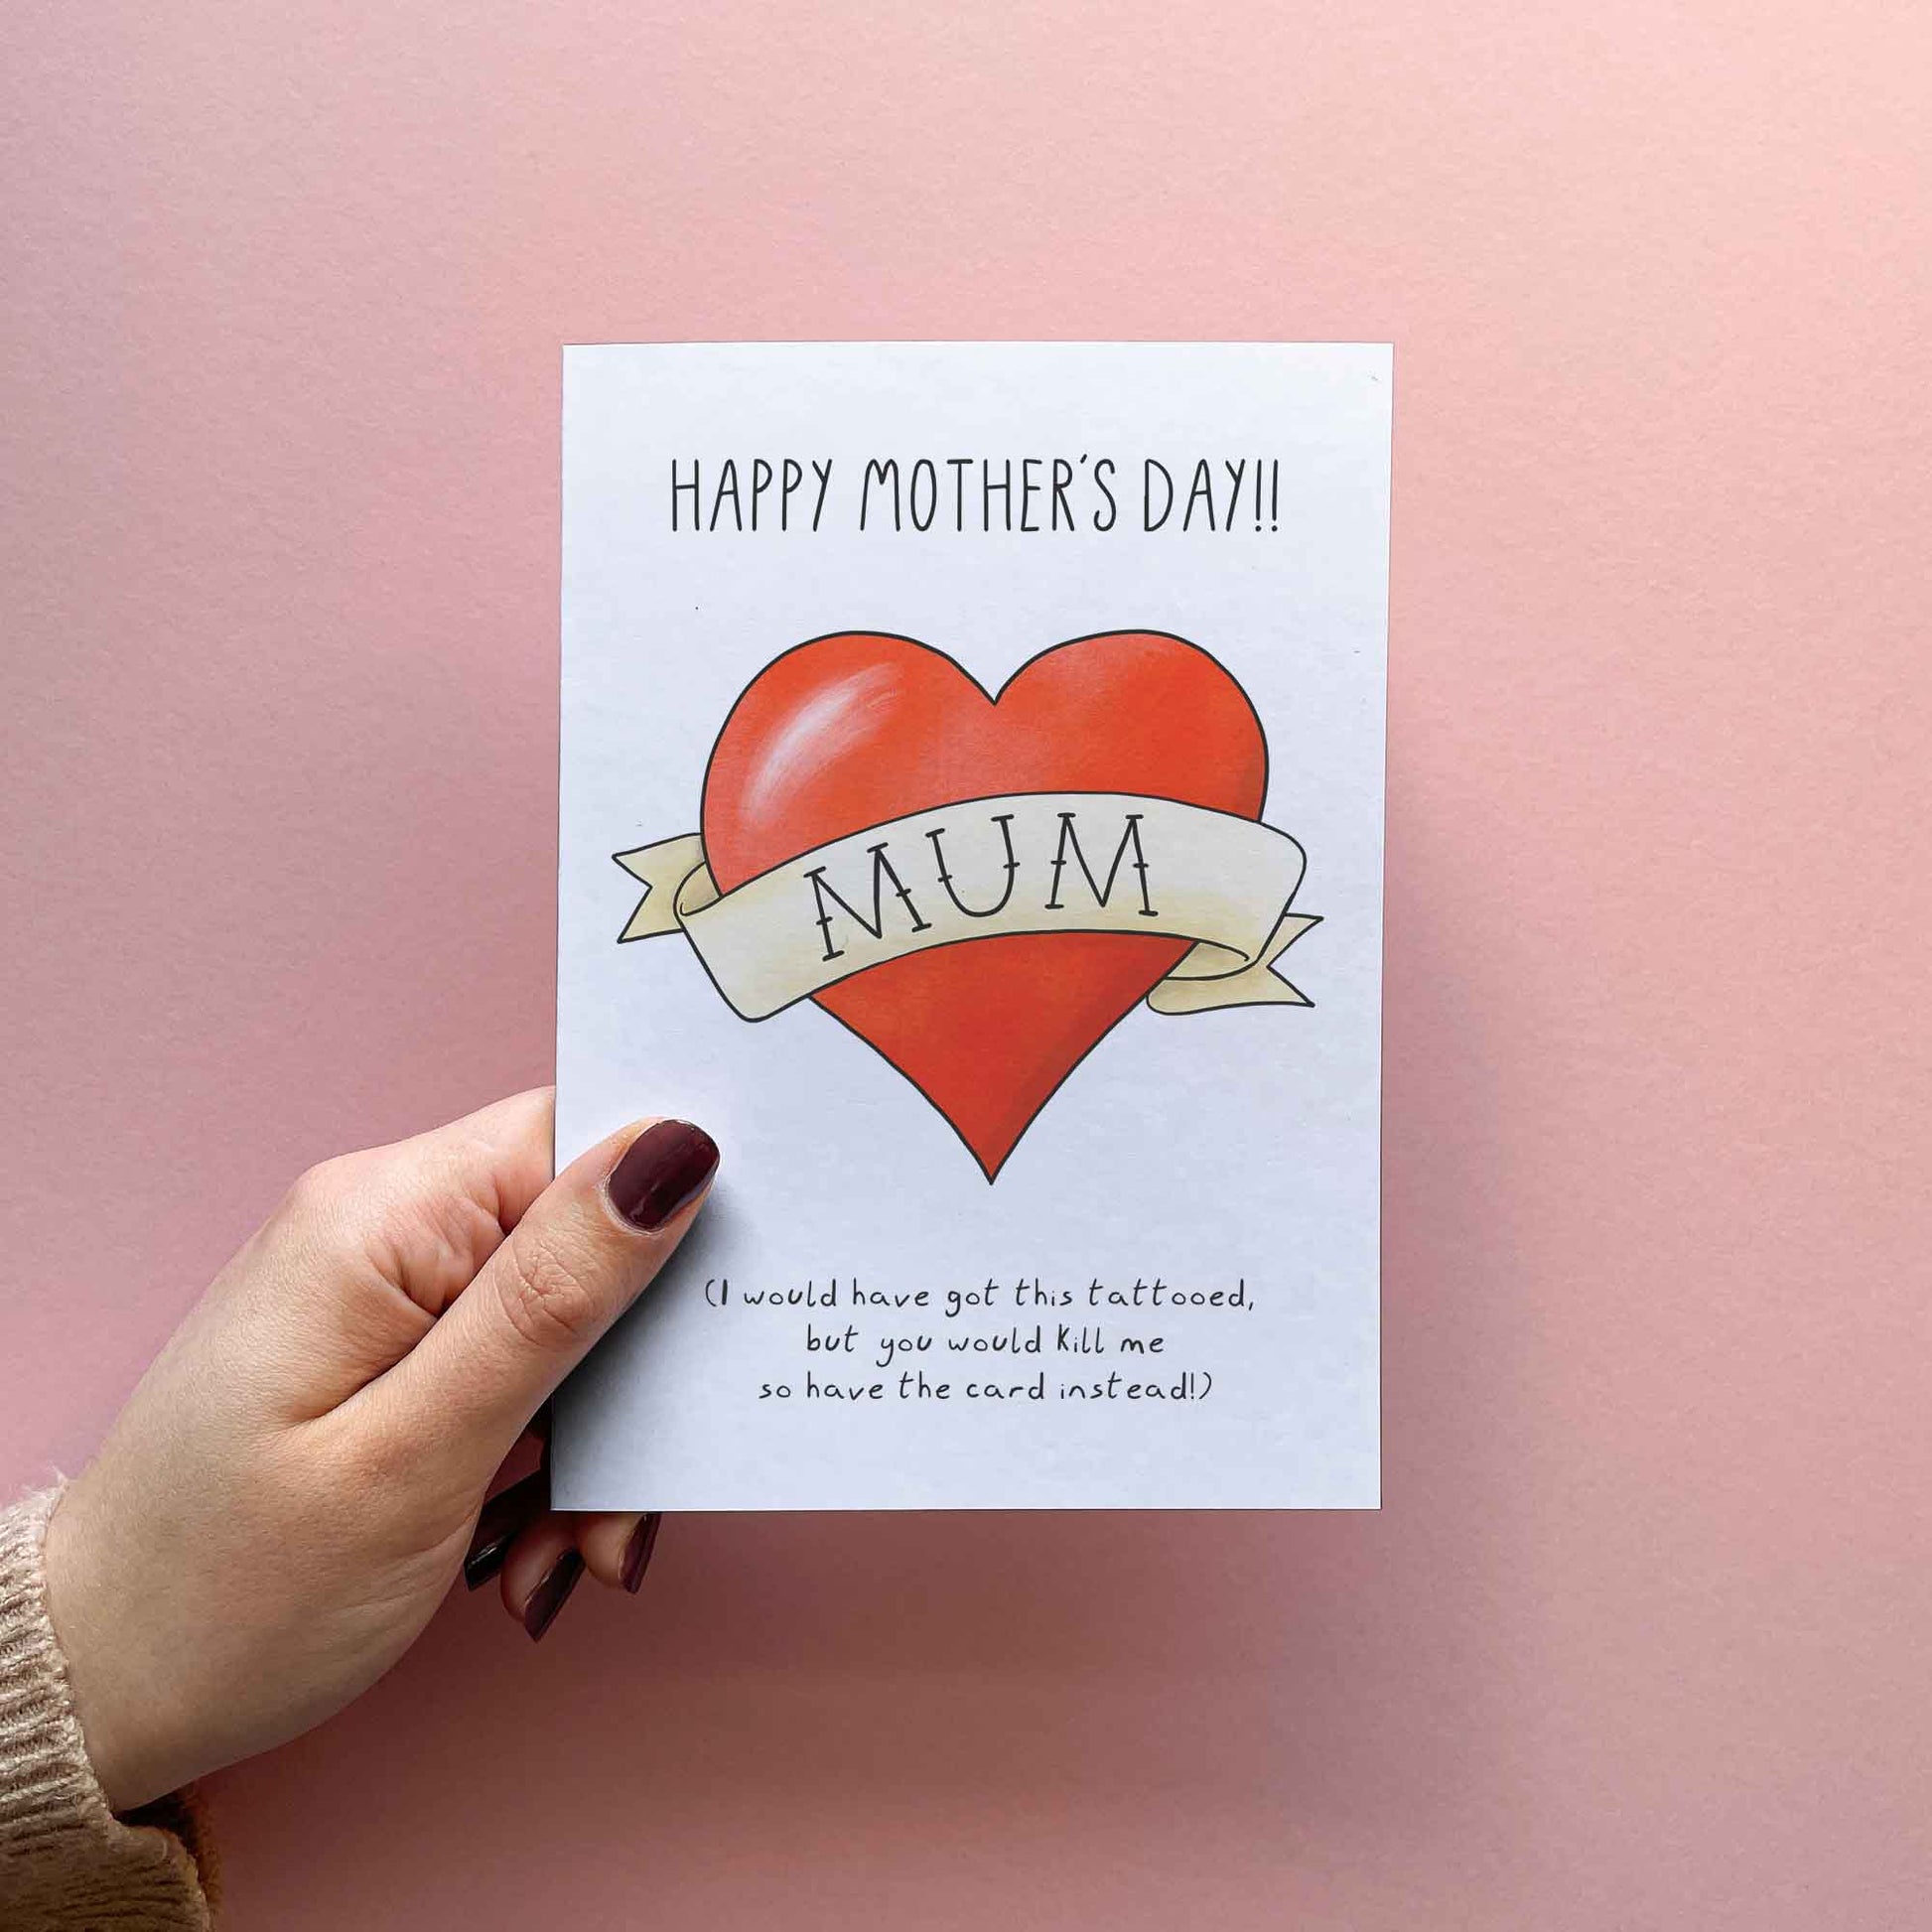 Funny mother's day card for mum. Mother's Day gift for Mom. Card with Mum tattoo illustration reading 'Happy Mother's Day!! (I would have got this tattooed but you would have killed me, so have the card instead!)'